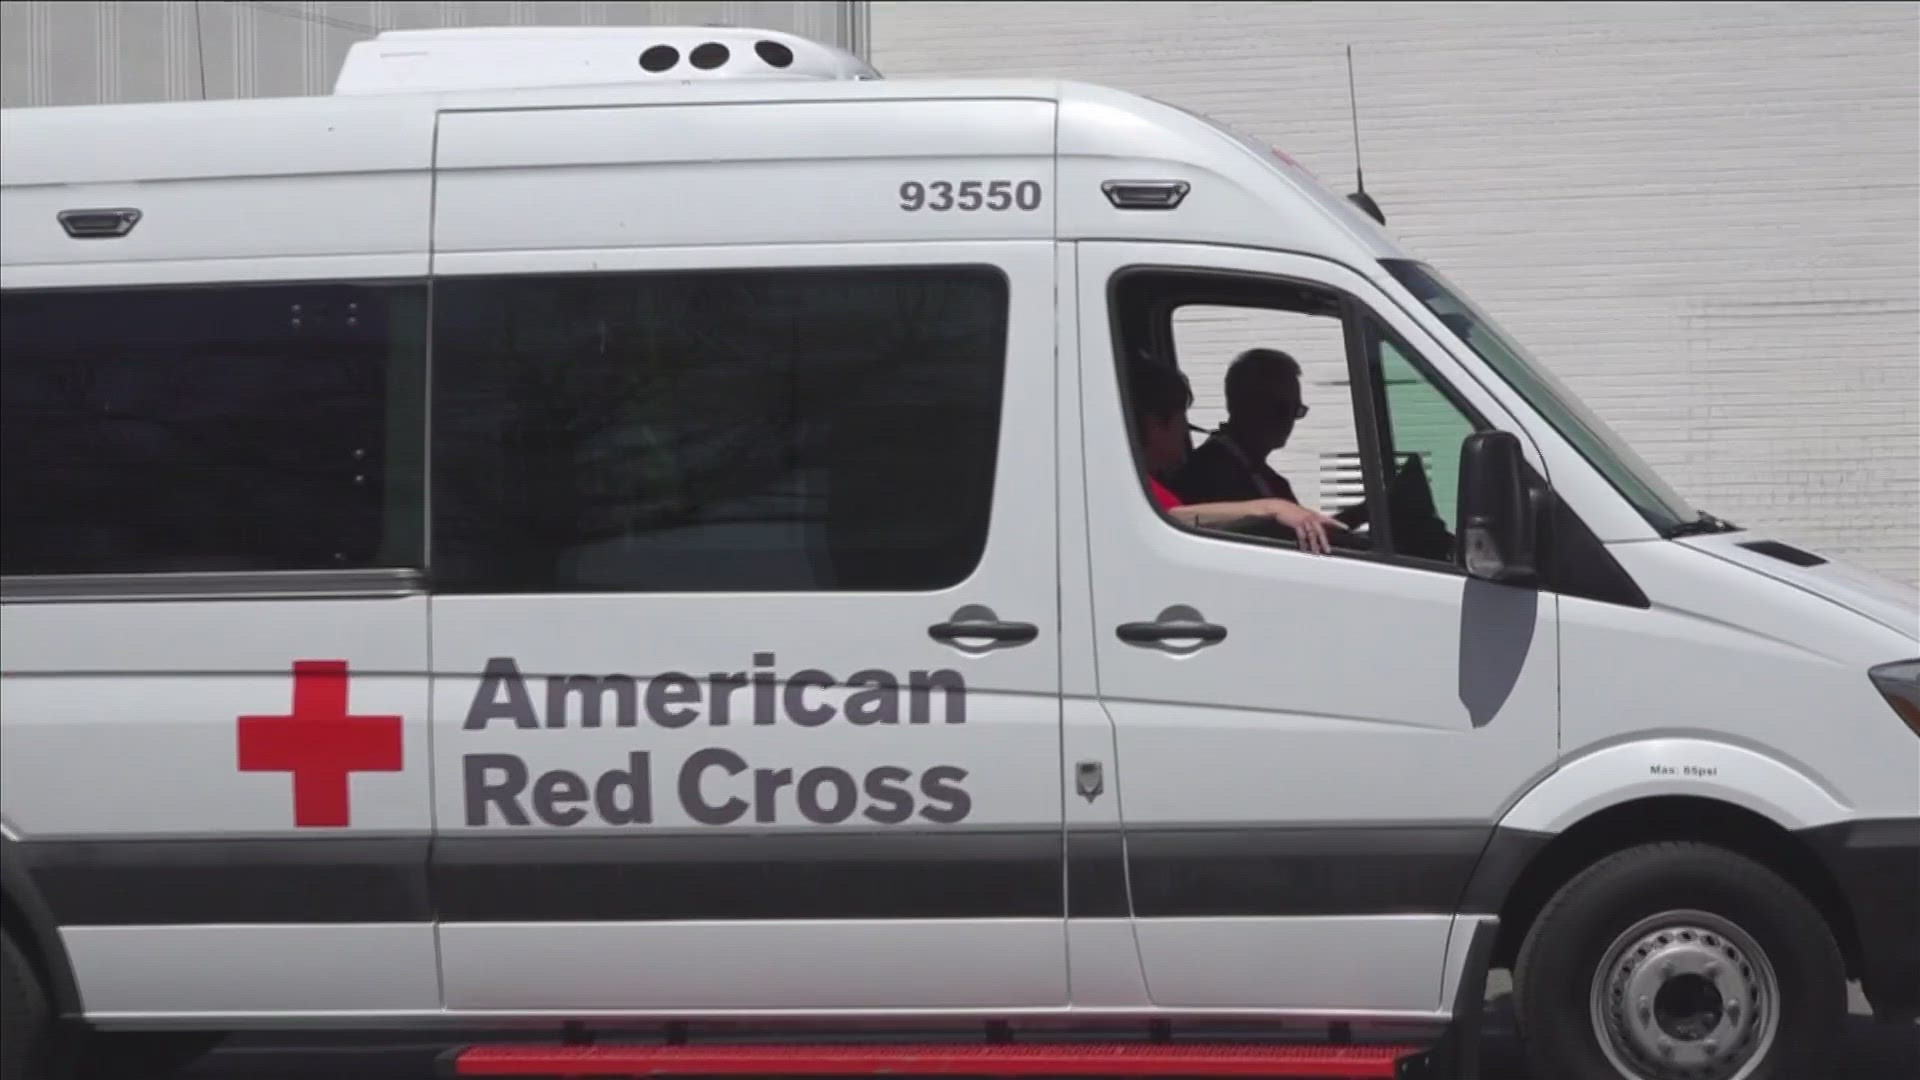 The Mid-South chapter of American Red Cross is sending four emergency response vehicles from The Volunteer State to The Magnolia State.